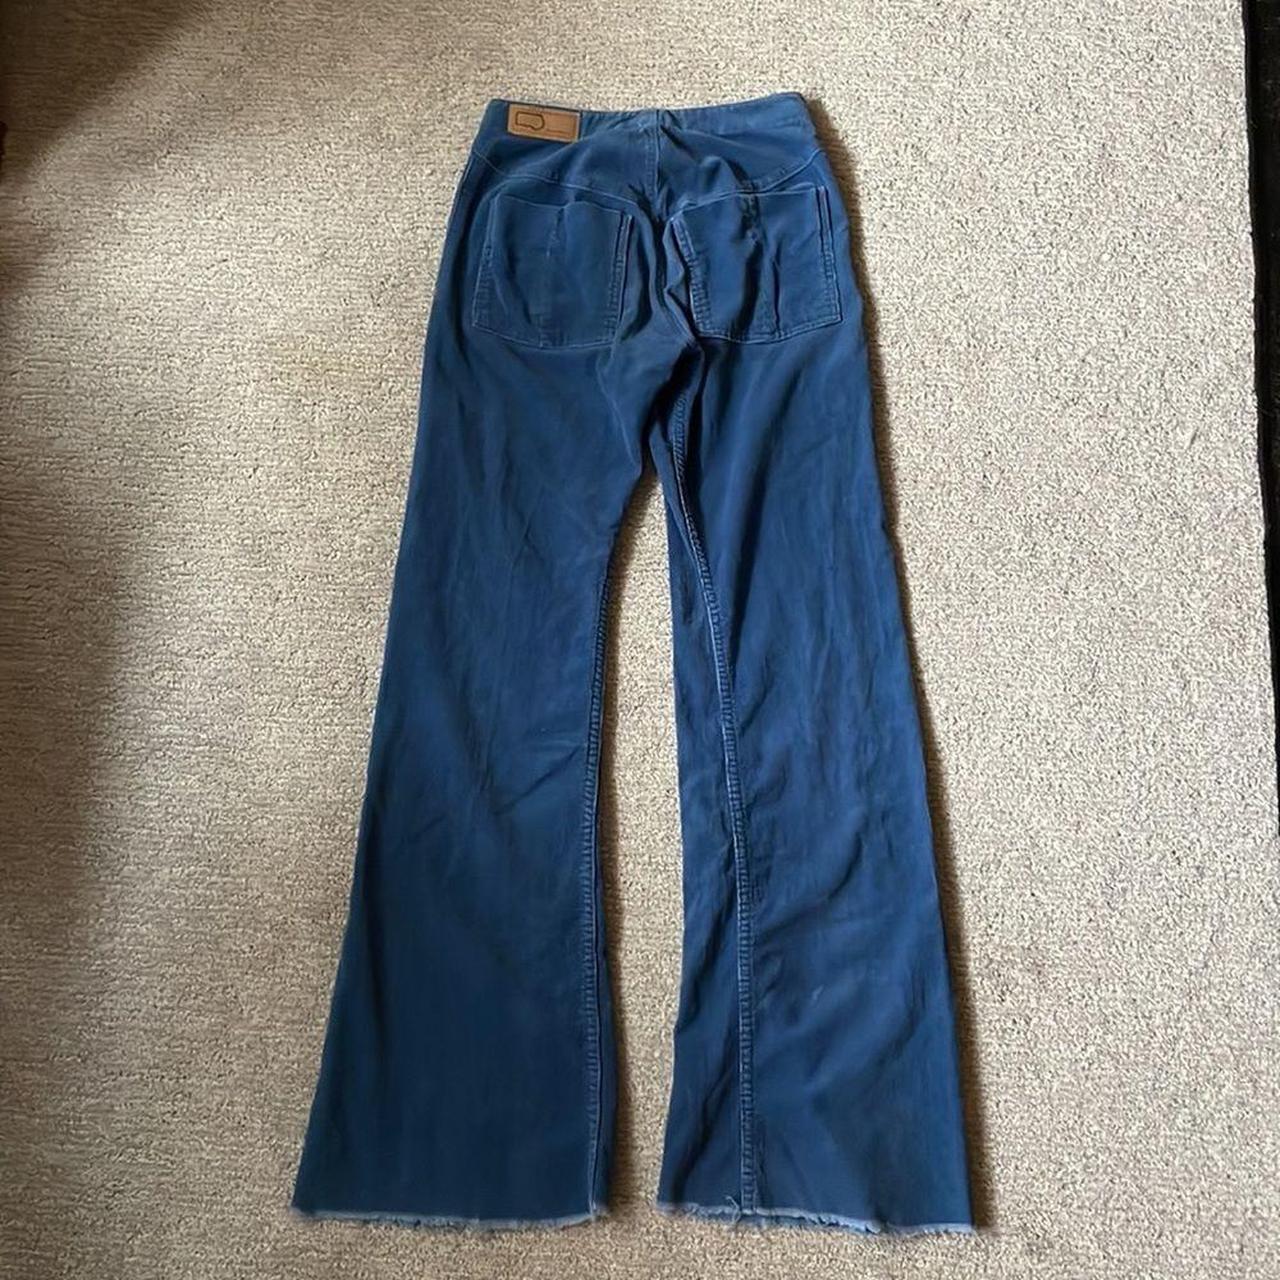 Grey Ant Women's Blue and Grey Trousers (4)